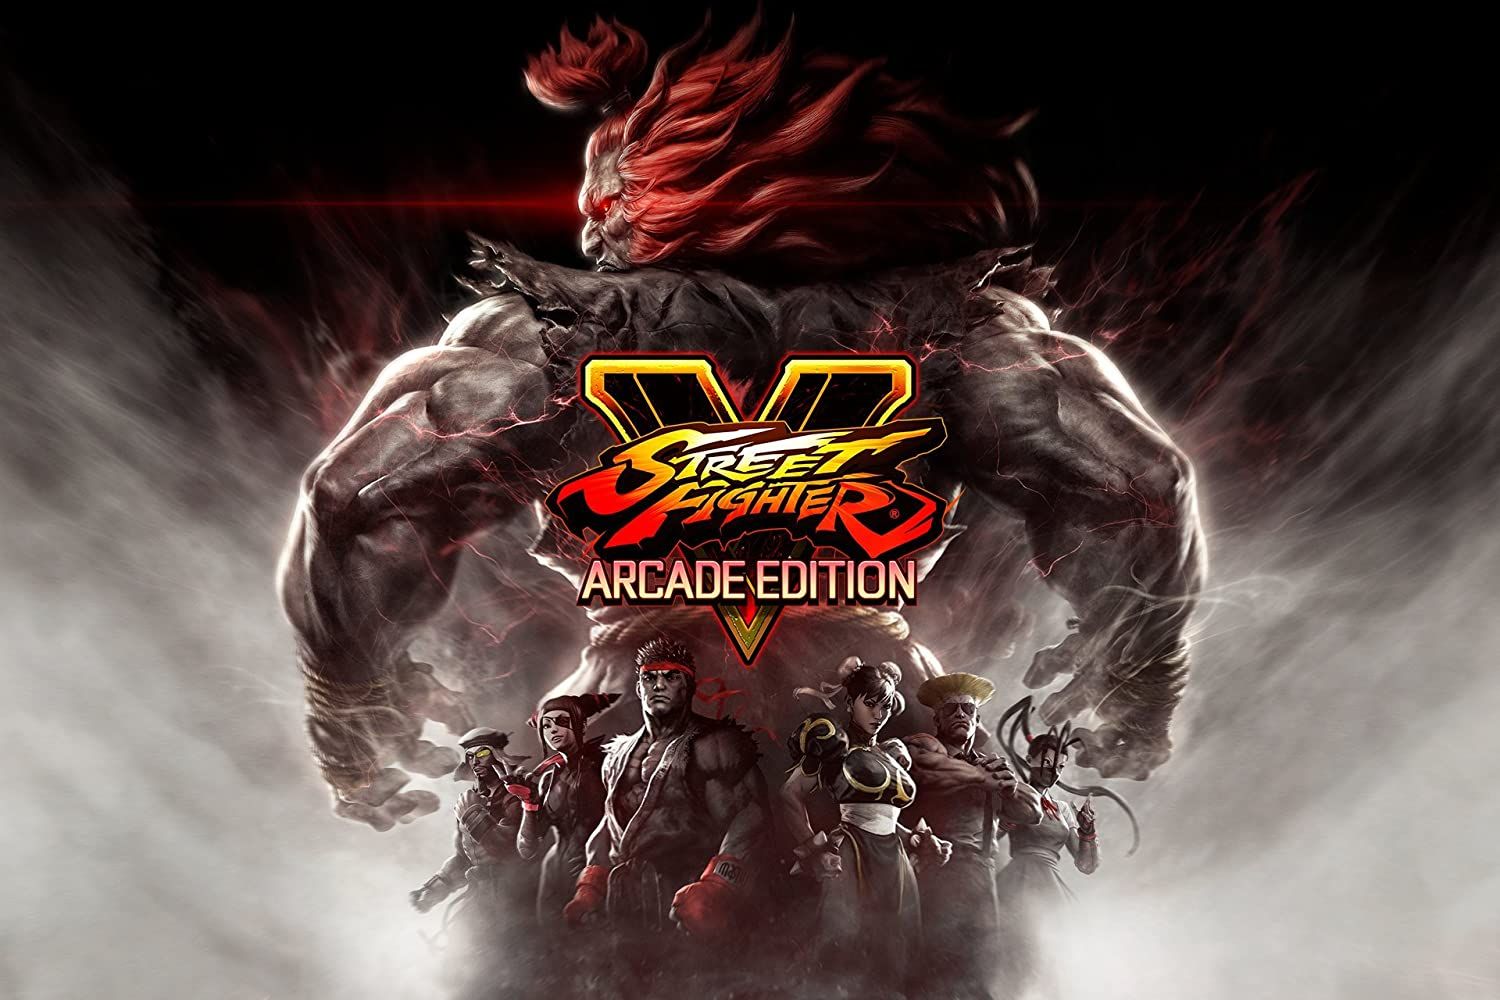 The Street Fighter cast cowers beneath Akuma and the Street Fighter V logo.